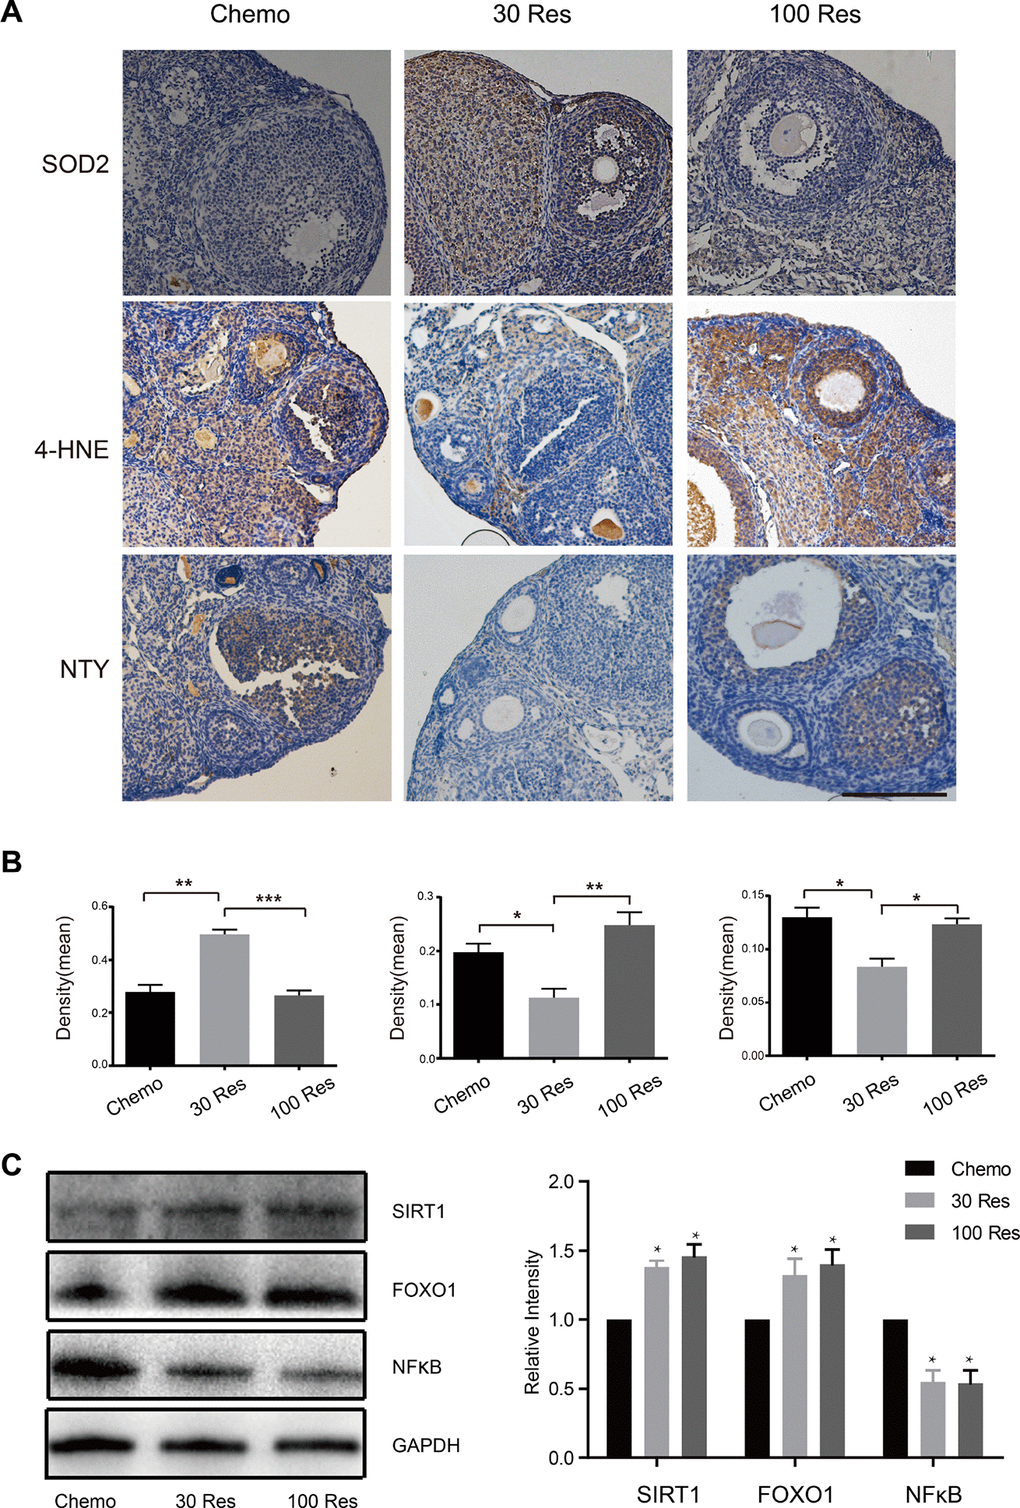 Resveratrol attenuated the oxidative stress of ovaries induced by chemotherapy. (A) The expression of SOD2, 4-HNE and NTY in the interstitial cells and follicles in the ovaries of Chemo, 30 Res and 100 Res groups of mice. Scale bar: 200 μm. *p B) The quantification of IHC. (C) The western blotting and quantification of of indicated proteins of ovaries in 3 groups. *p 